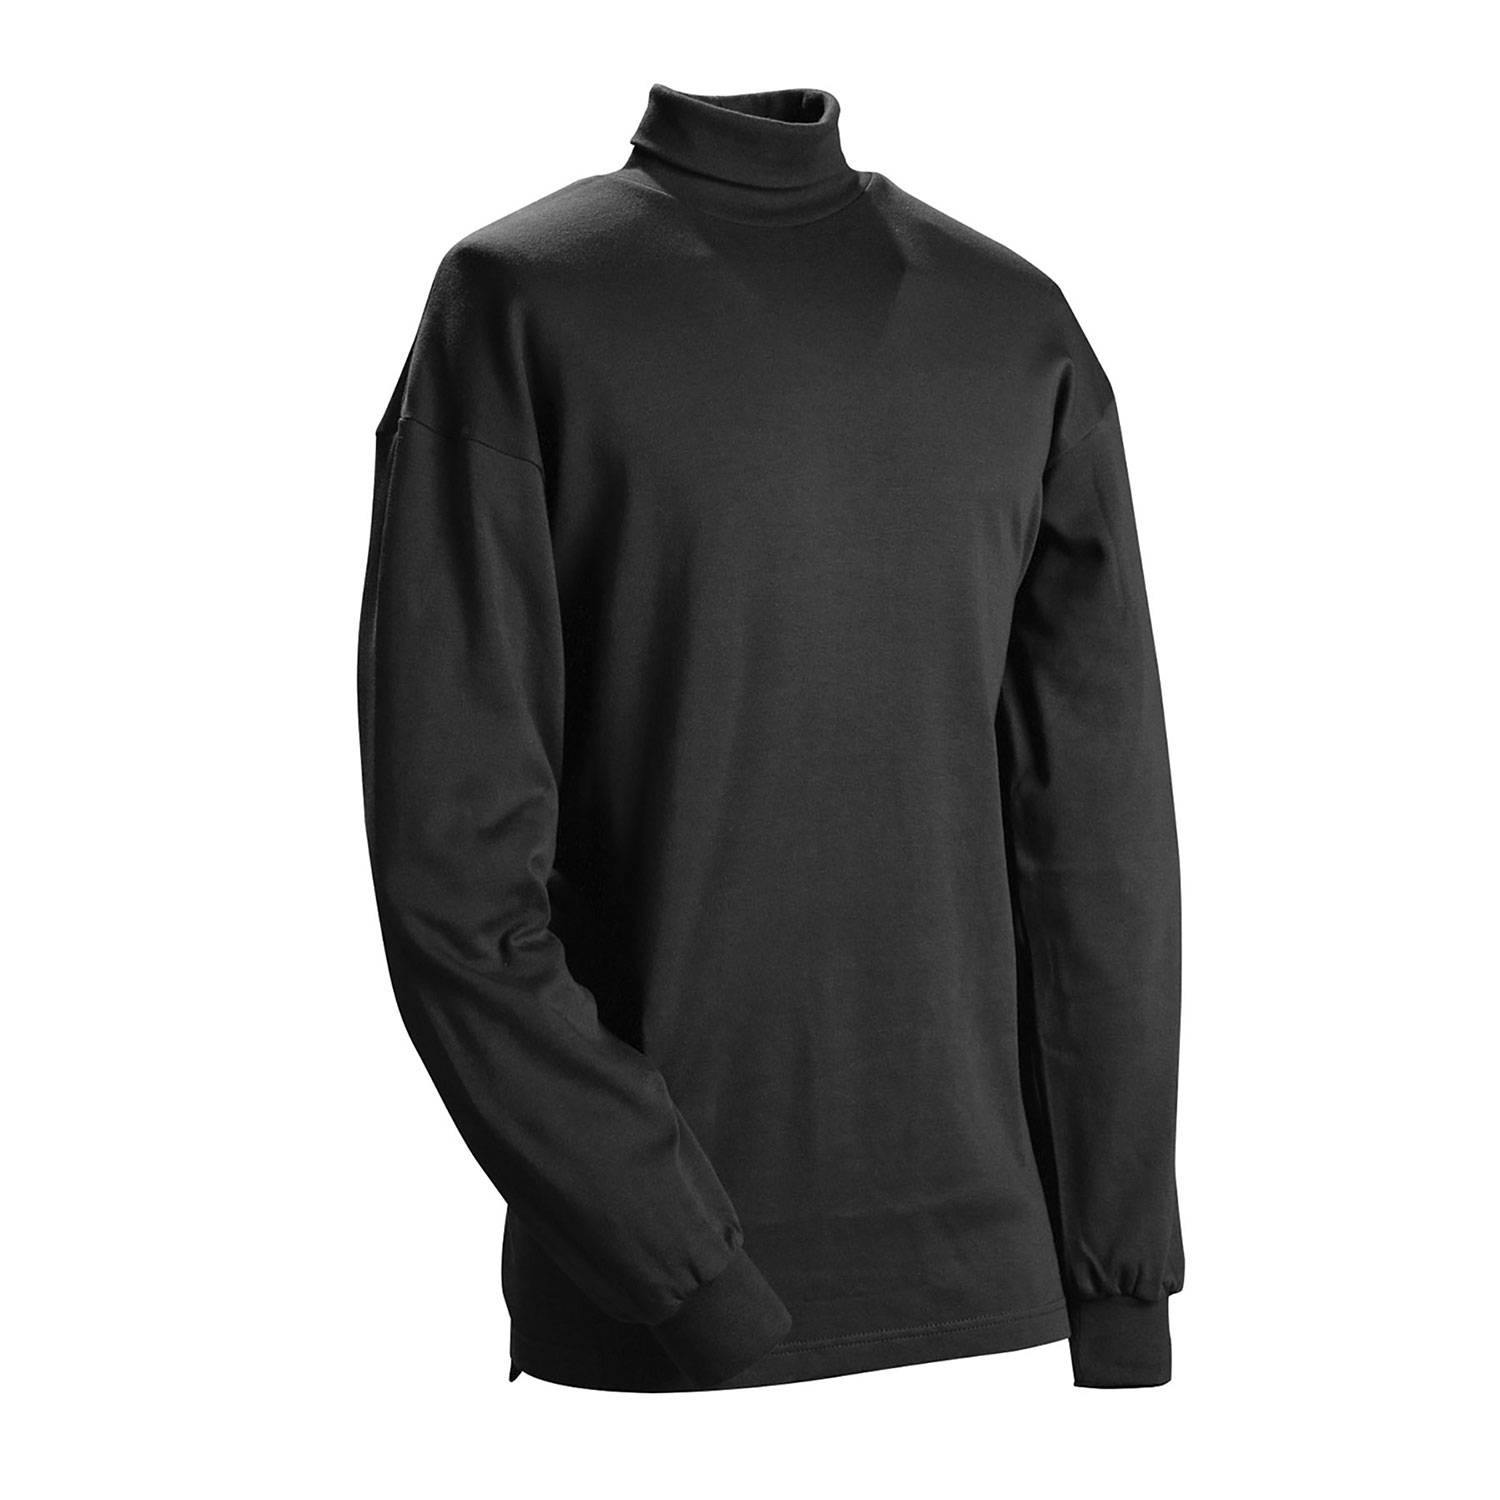 GALLS POLY-COTTON LONG SLEEVE CLASSIC TURTLENECK